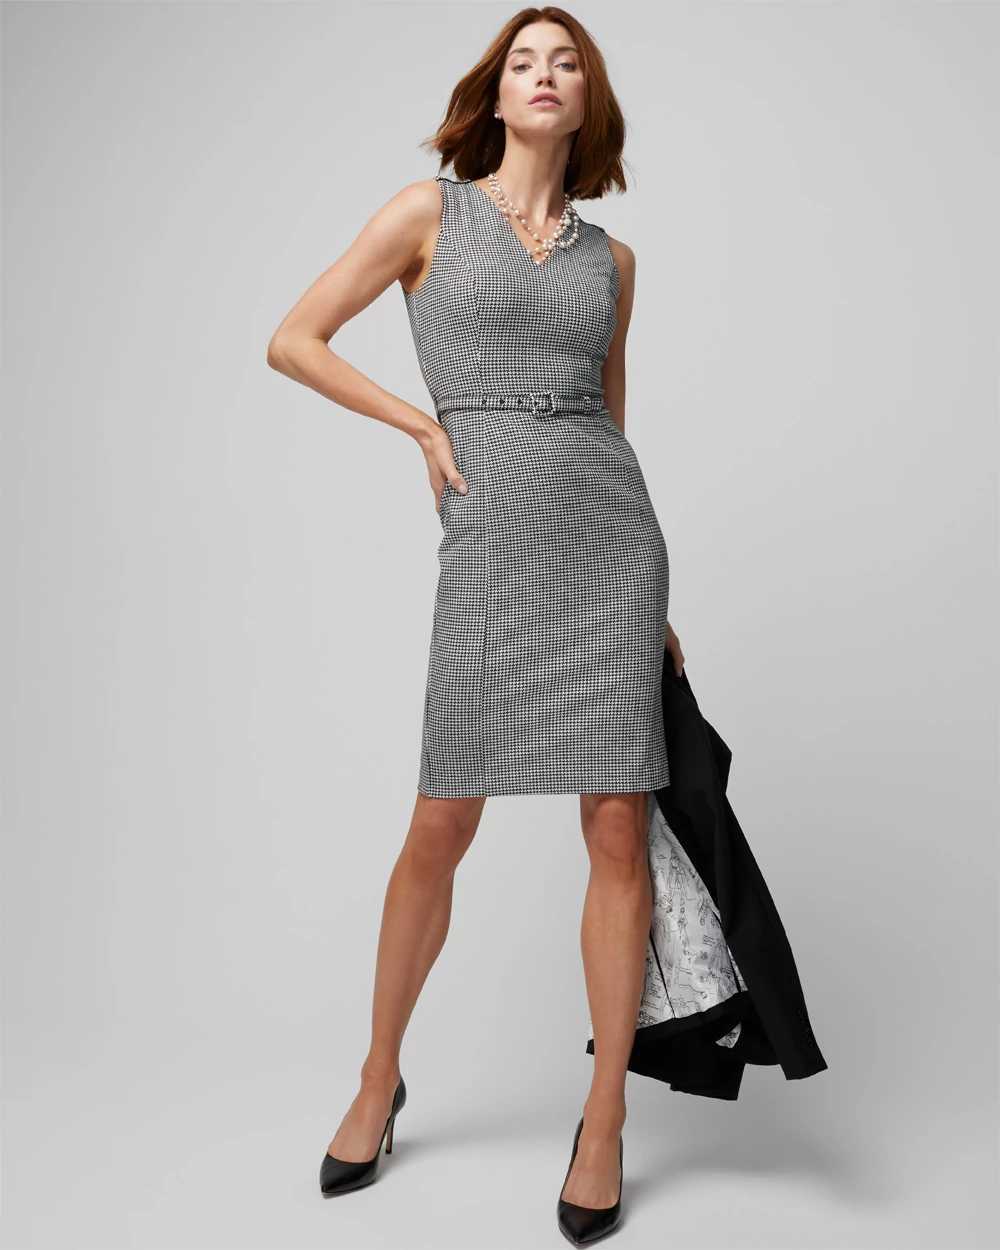 Sleeveless V-Neck Belted Work Sheath Dress click to view larger image.